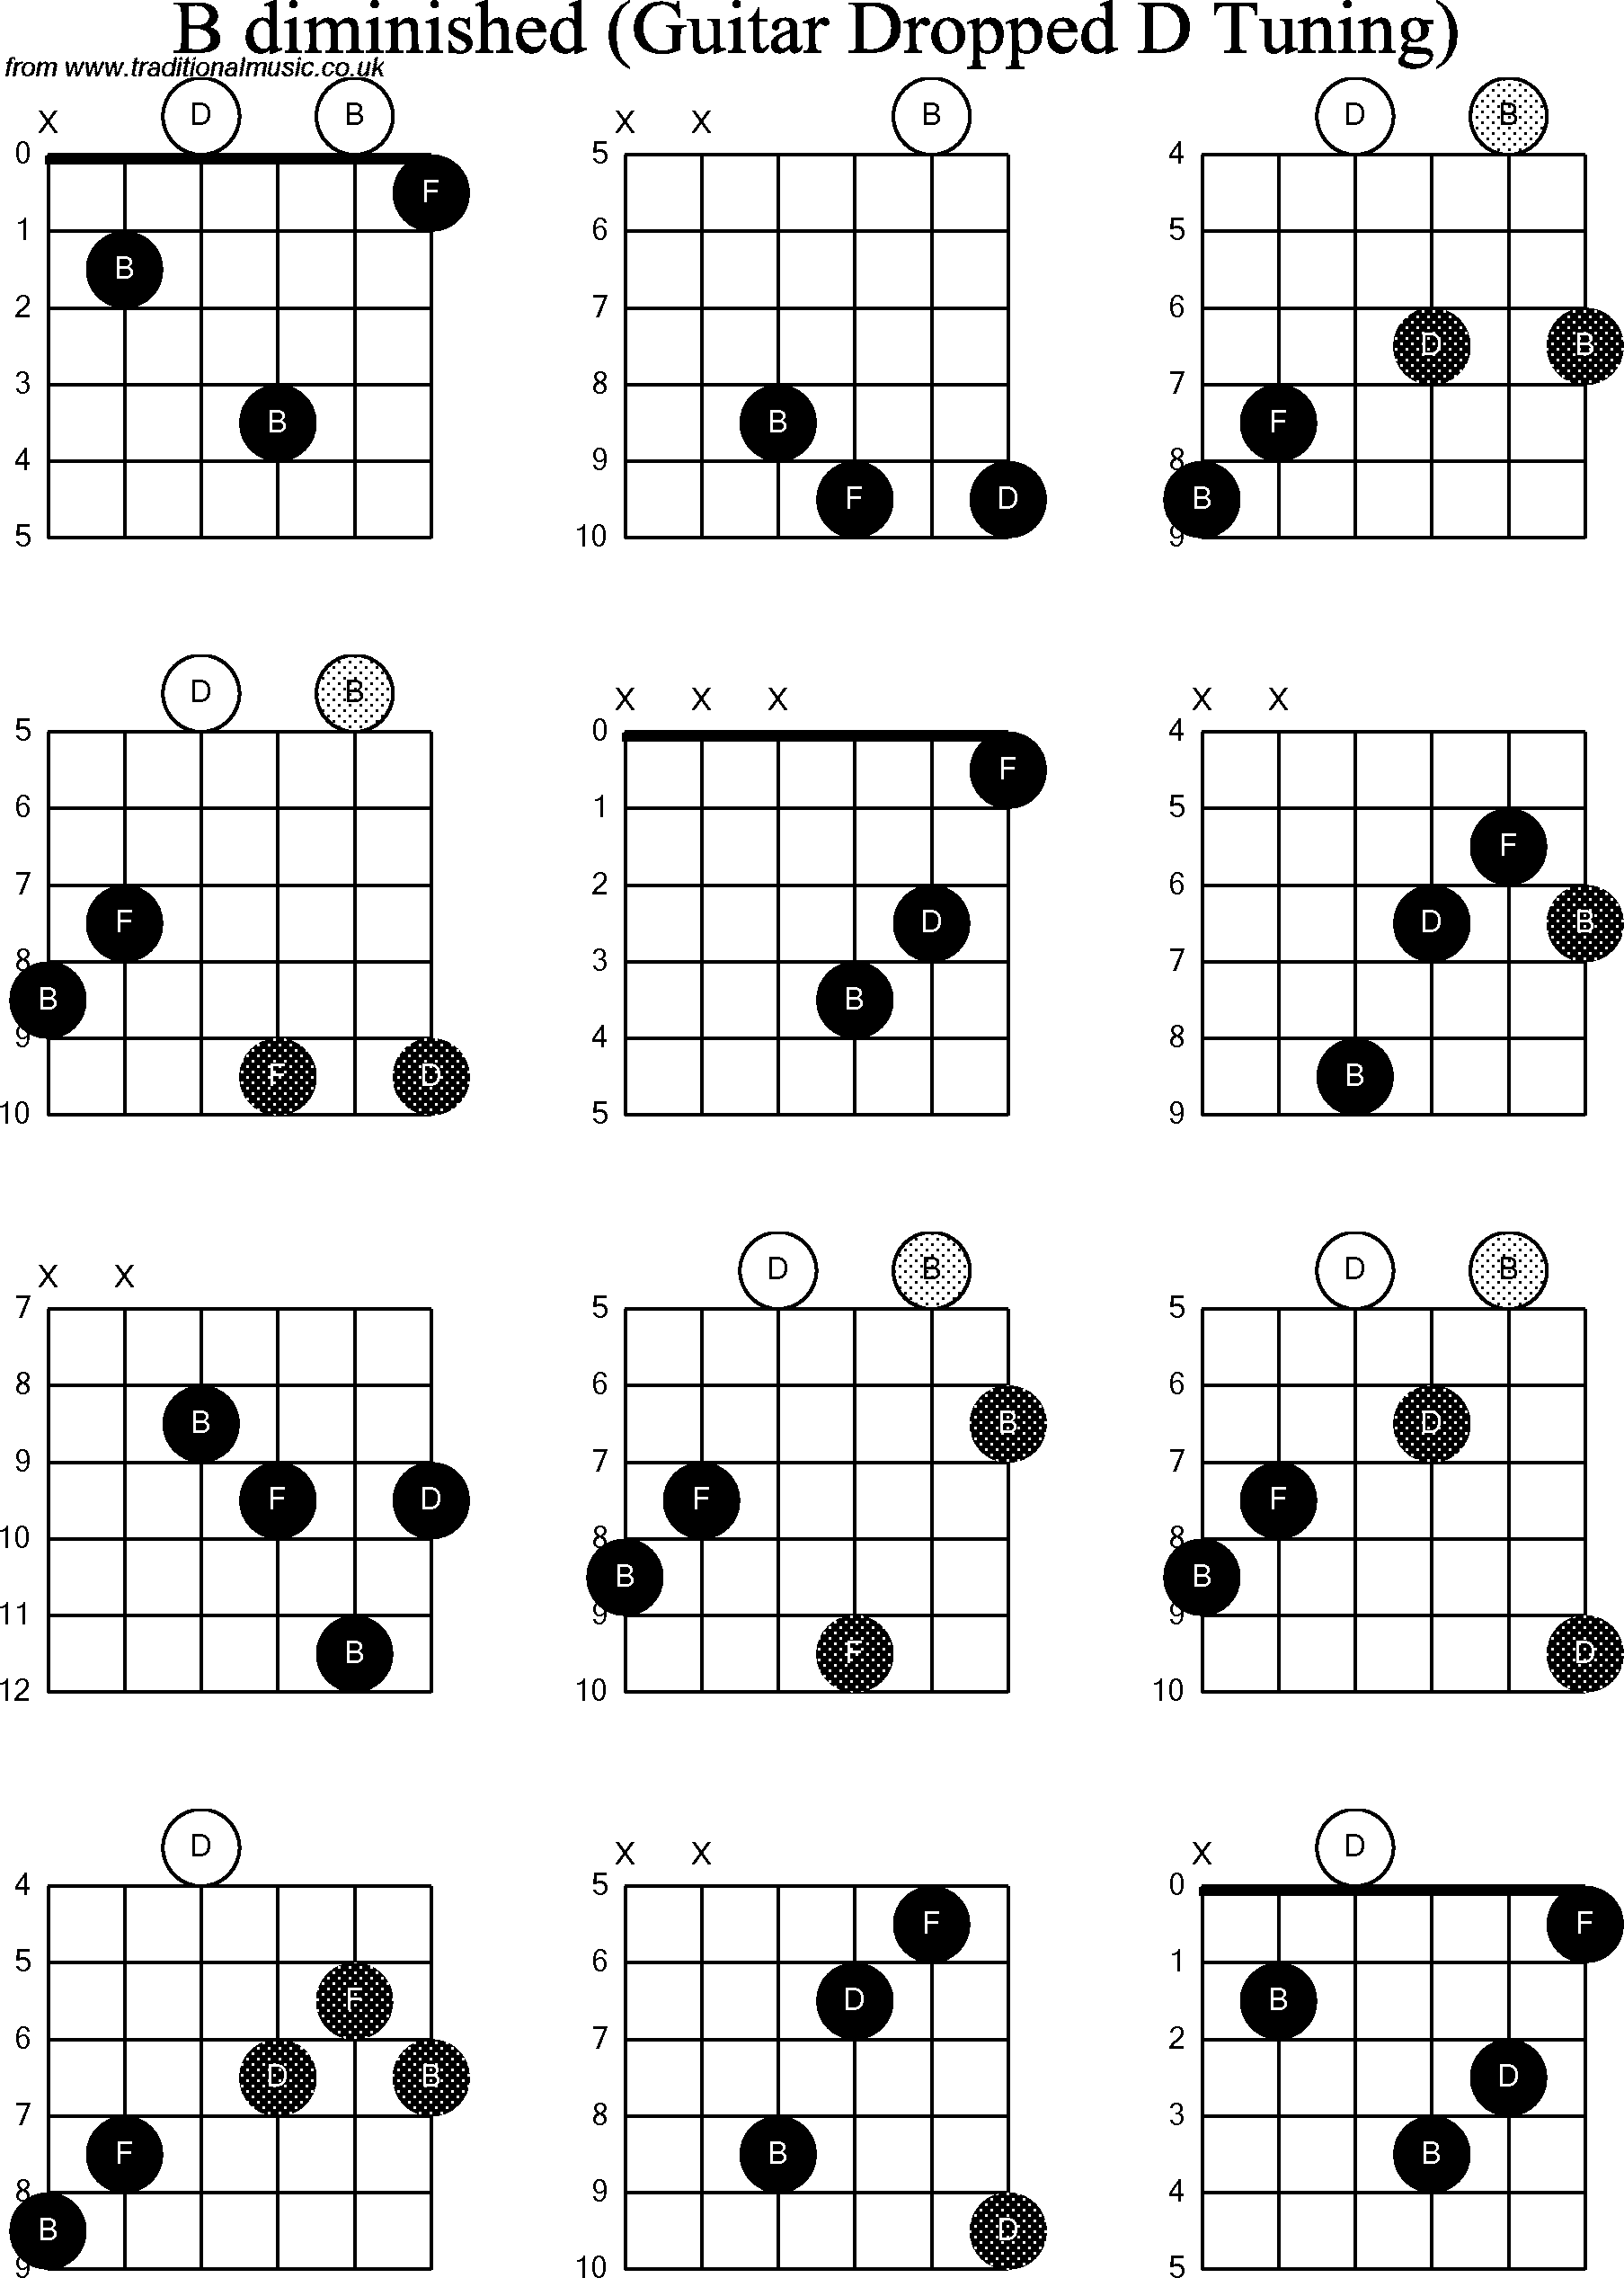 Chord diagrams for dropped D Guitar(DADGBE), B Diminished